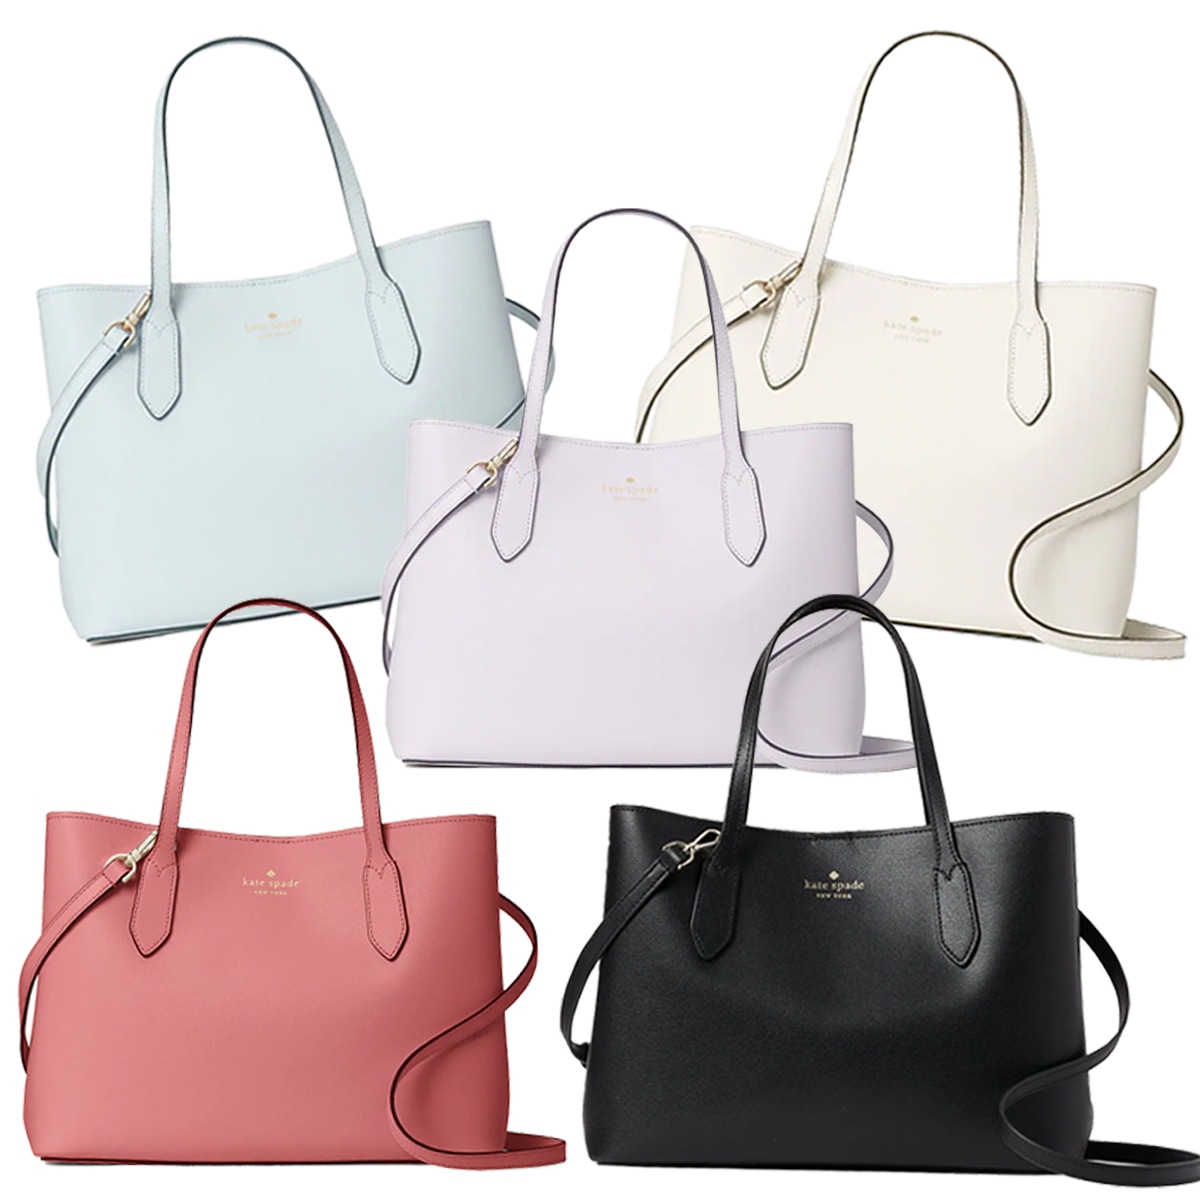 Kate Spade 24-Hour Flash Deal: Get a $360 Reversible Tote for Just $79